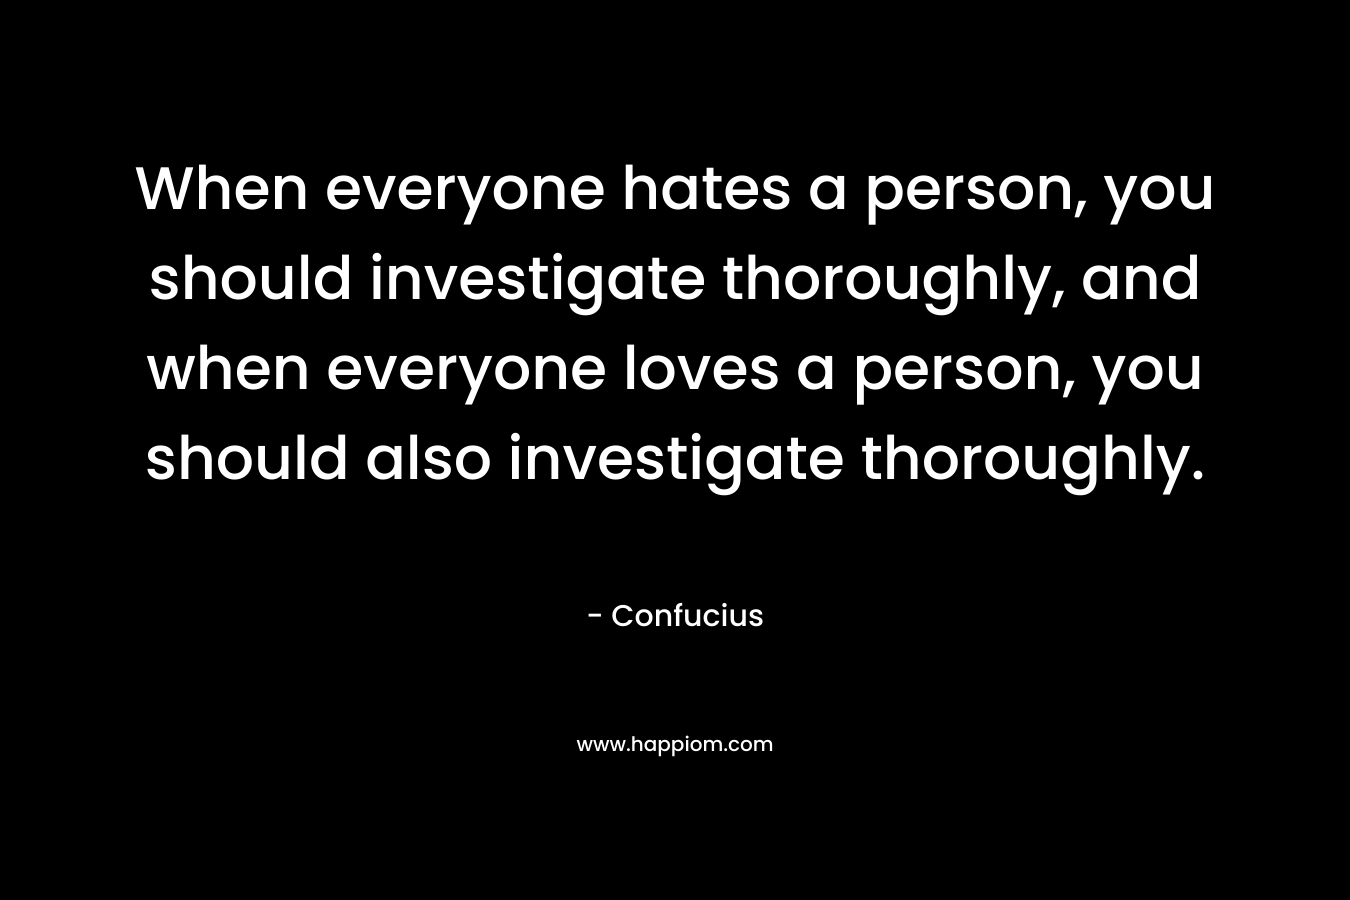 When everyone hates a person, you should investigate thoroughly, and when everyone loves a person, you should also investigate thoroughly. – Confucius